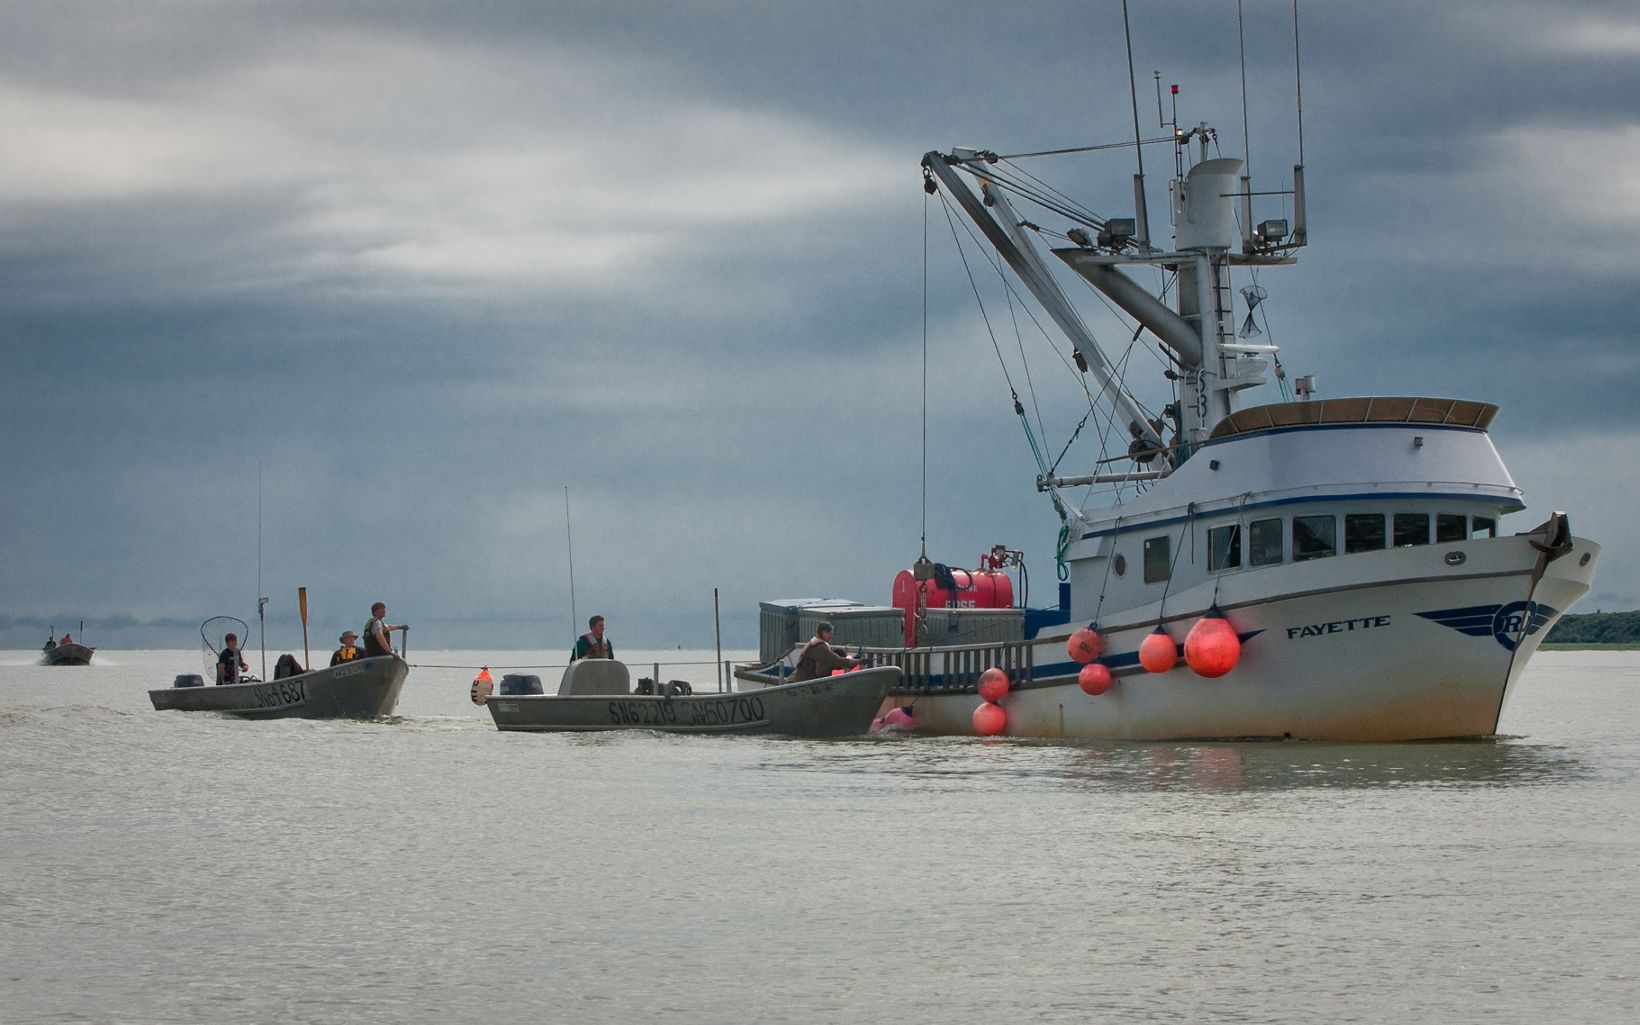 A large commercial fishing boat sits in a body of water with three smaller boats lining up beside it.